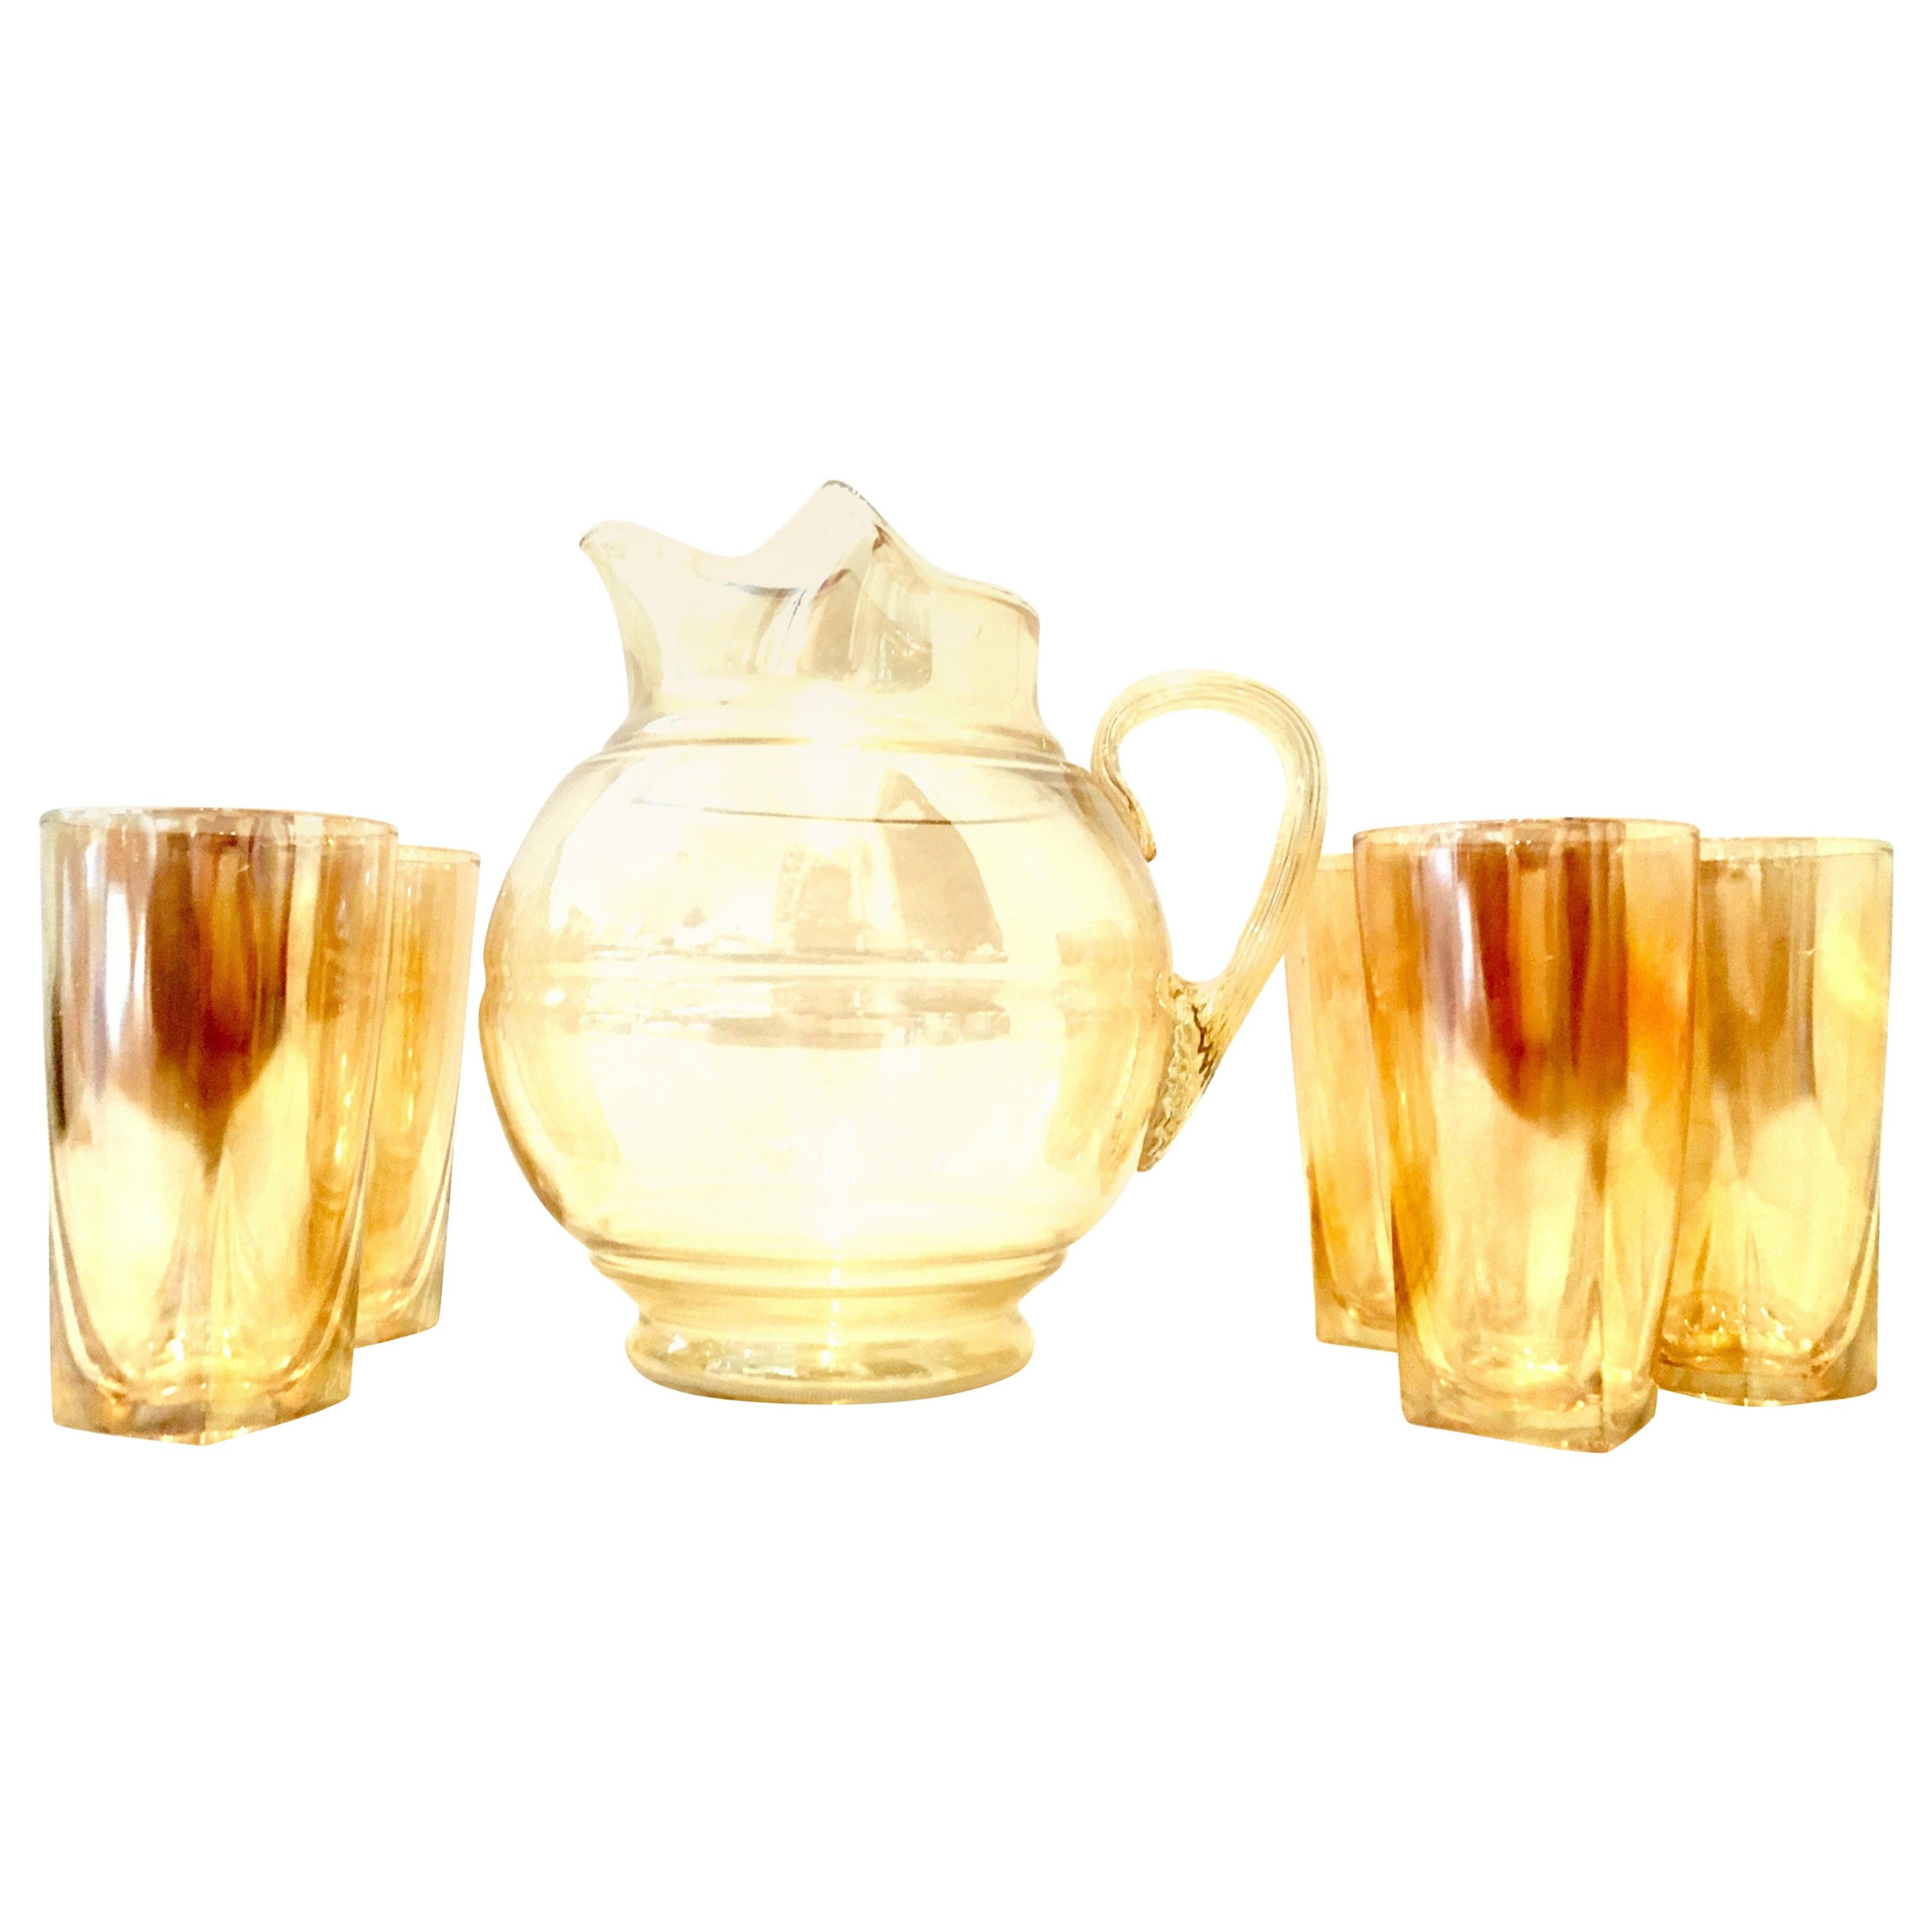 Mid-20th Century American Blown Glass Iridescent Peach Drinks Set of Six Pieces For Sale